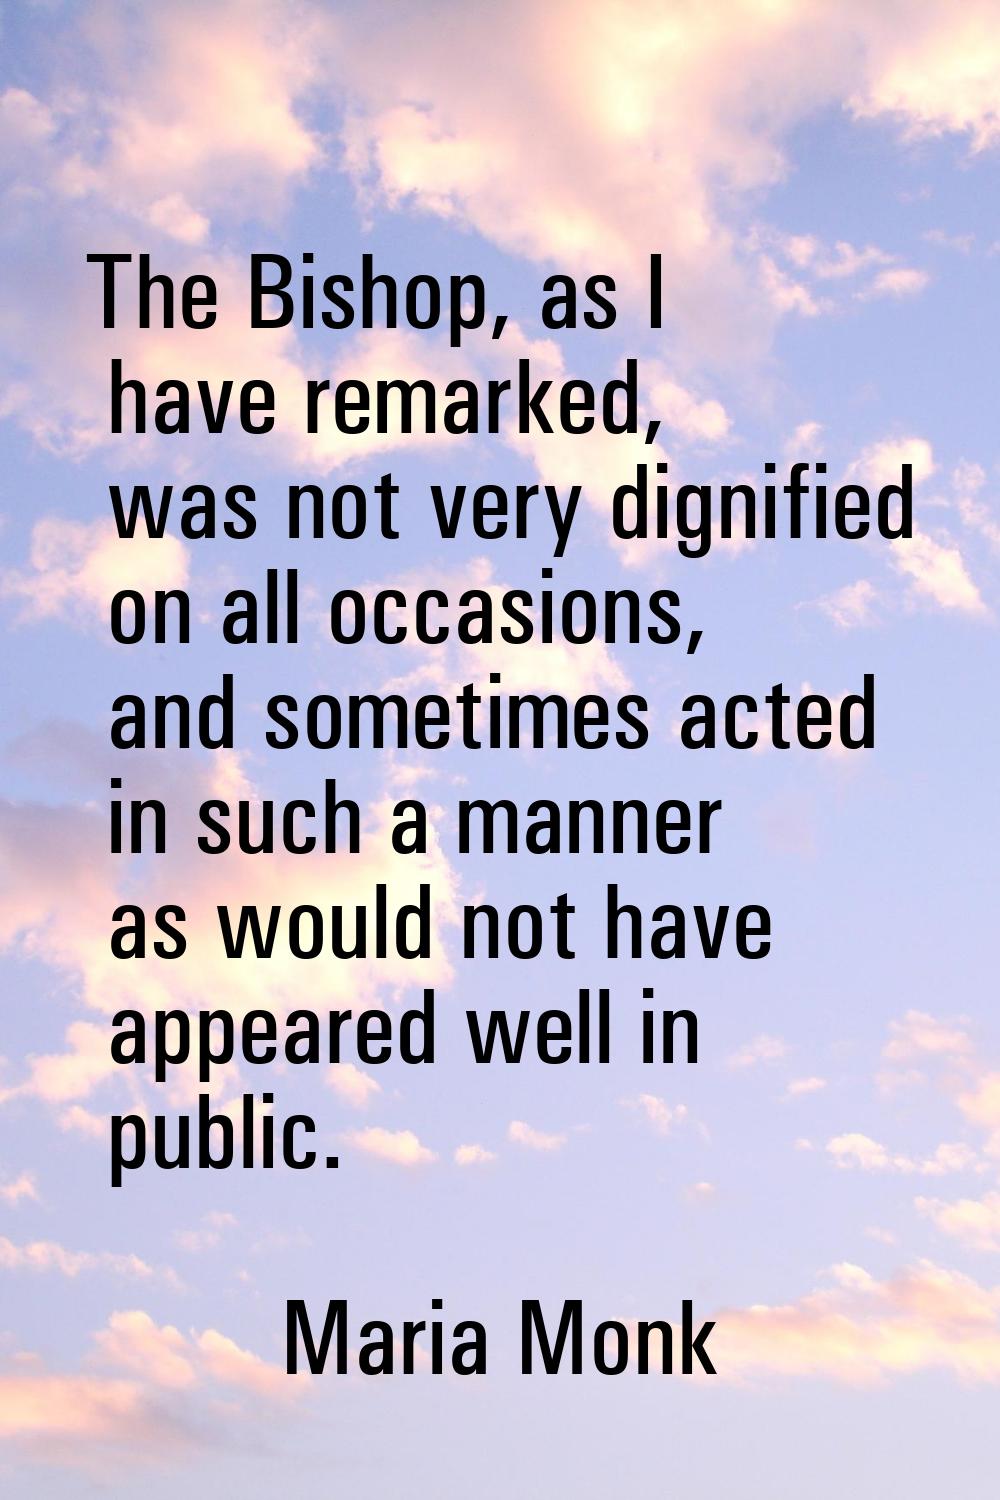 The Bishop, as I have remarked, was not very dignified on all occasions, and sometimes acted in suc